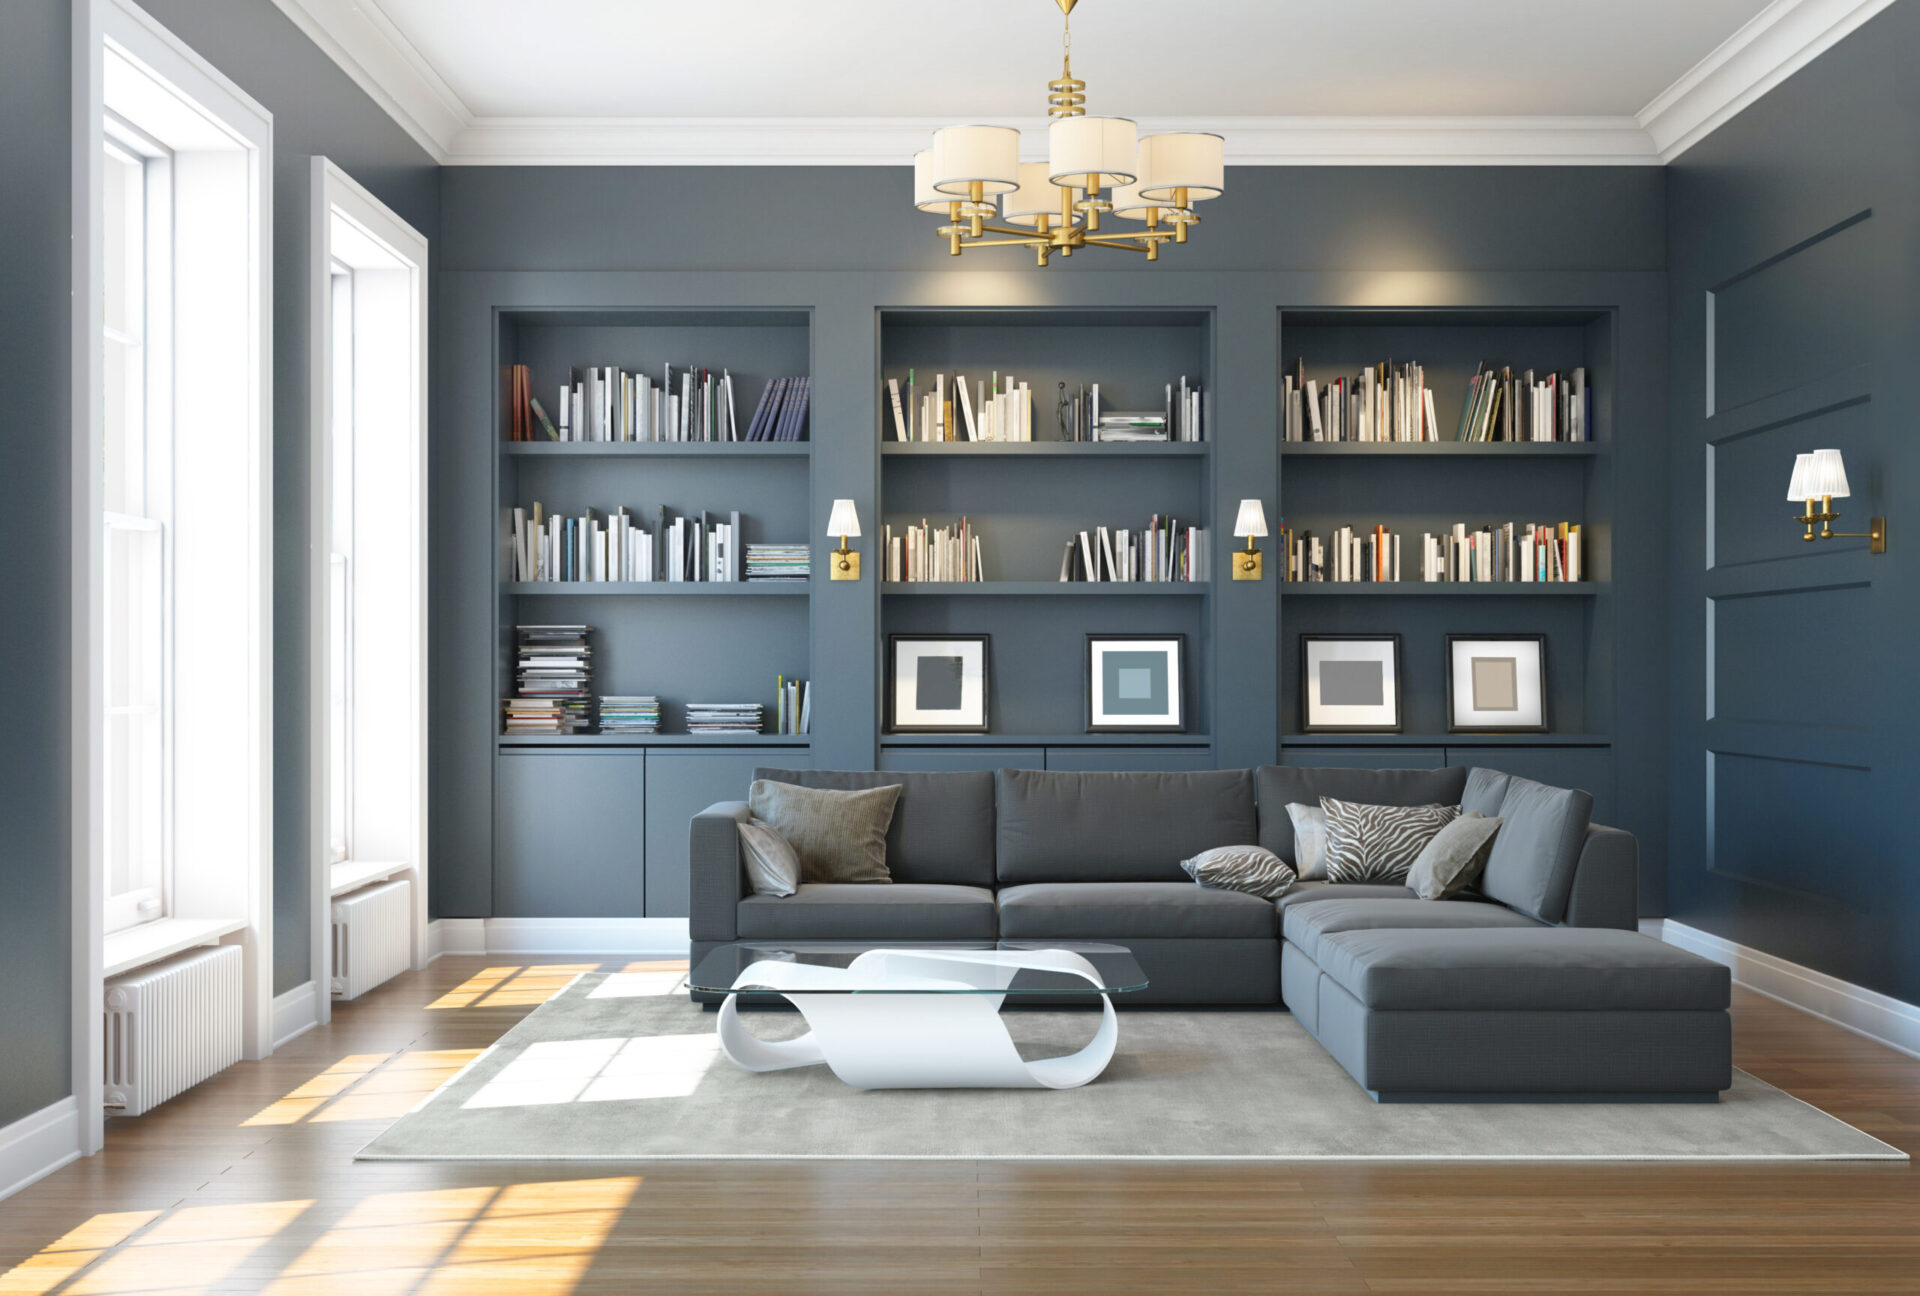 An image of a dark blue reading room with a hardwood floor with many examples of different moulding types available at The Moulding Company